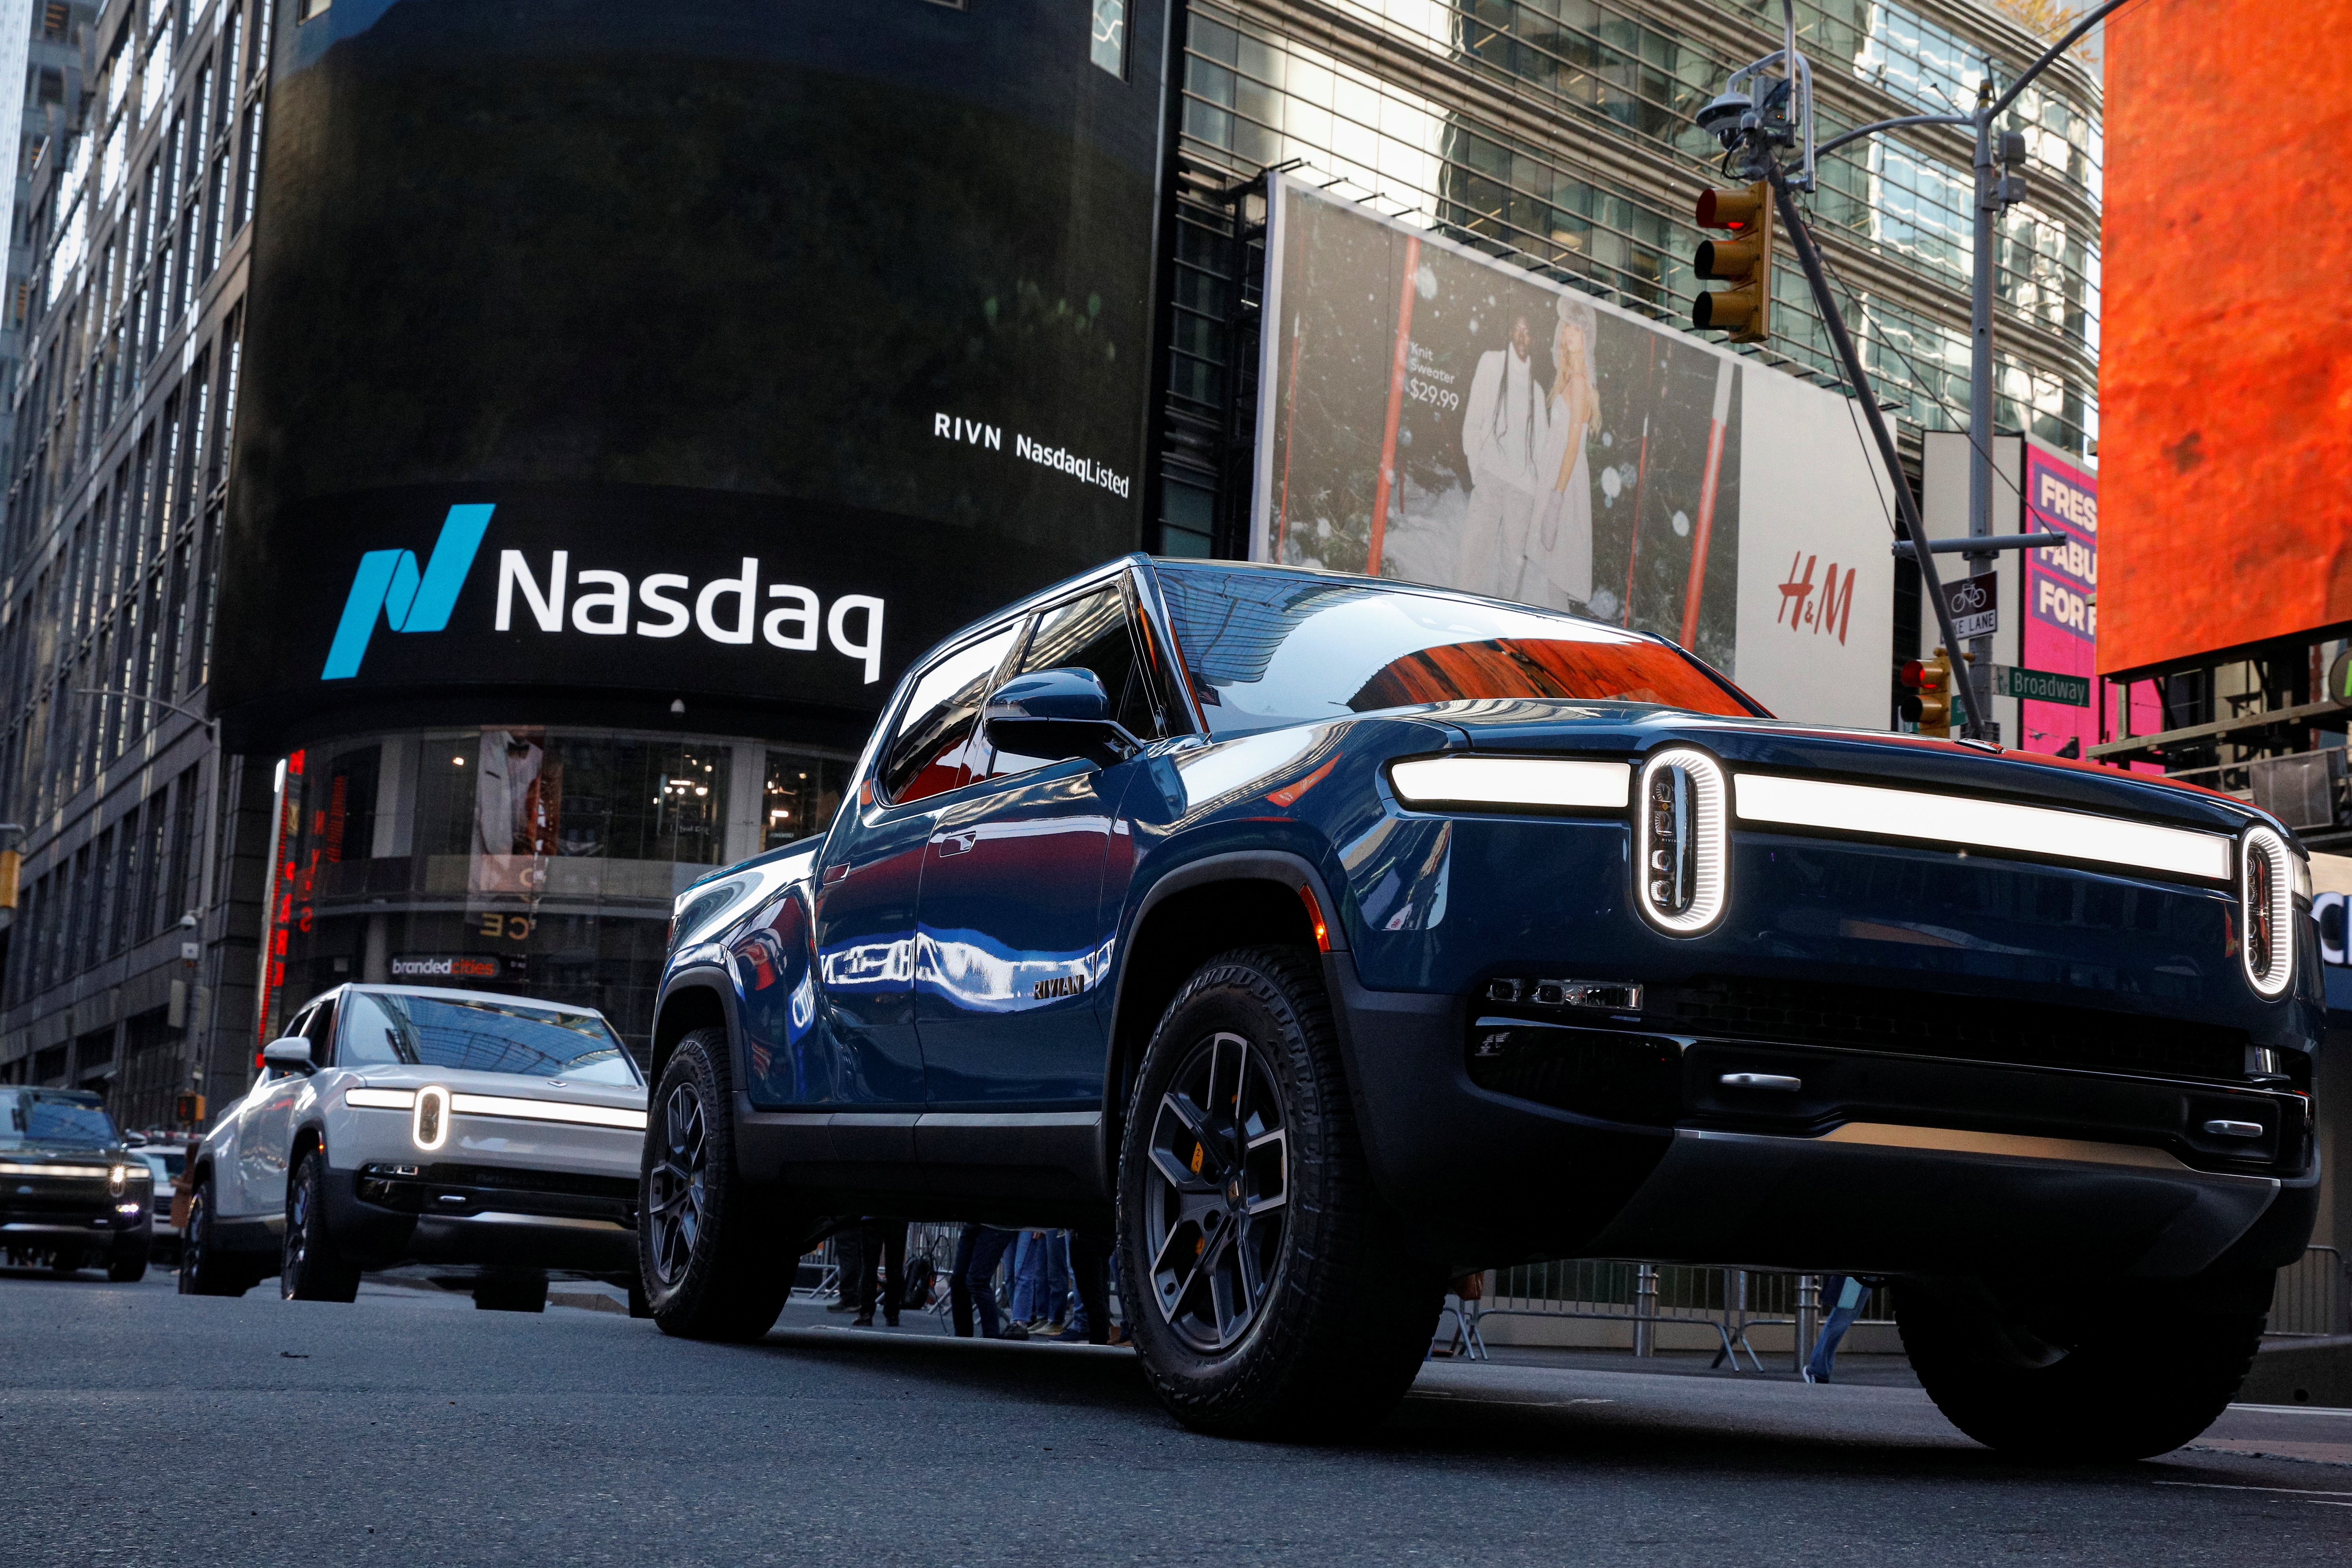 The Nasdaq, where the UK’s top tech players usually end up